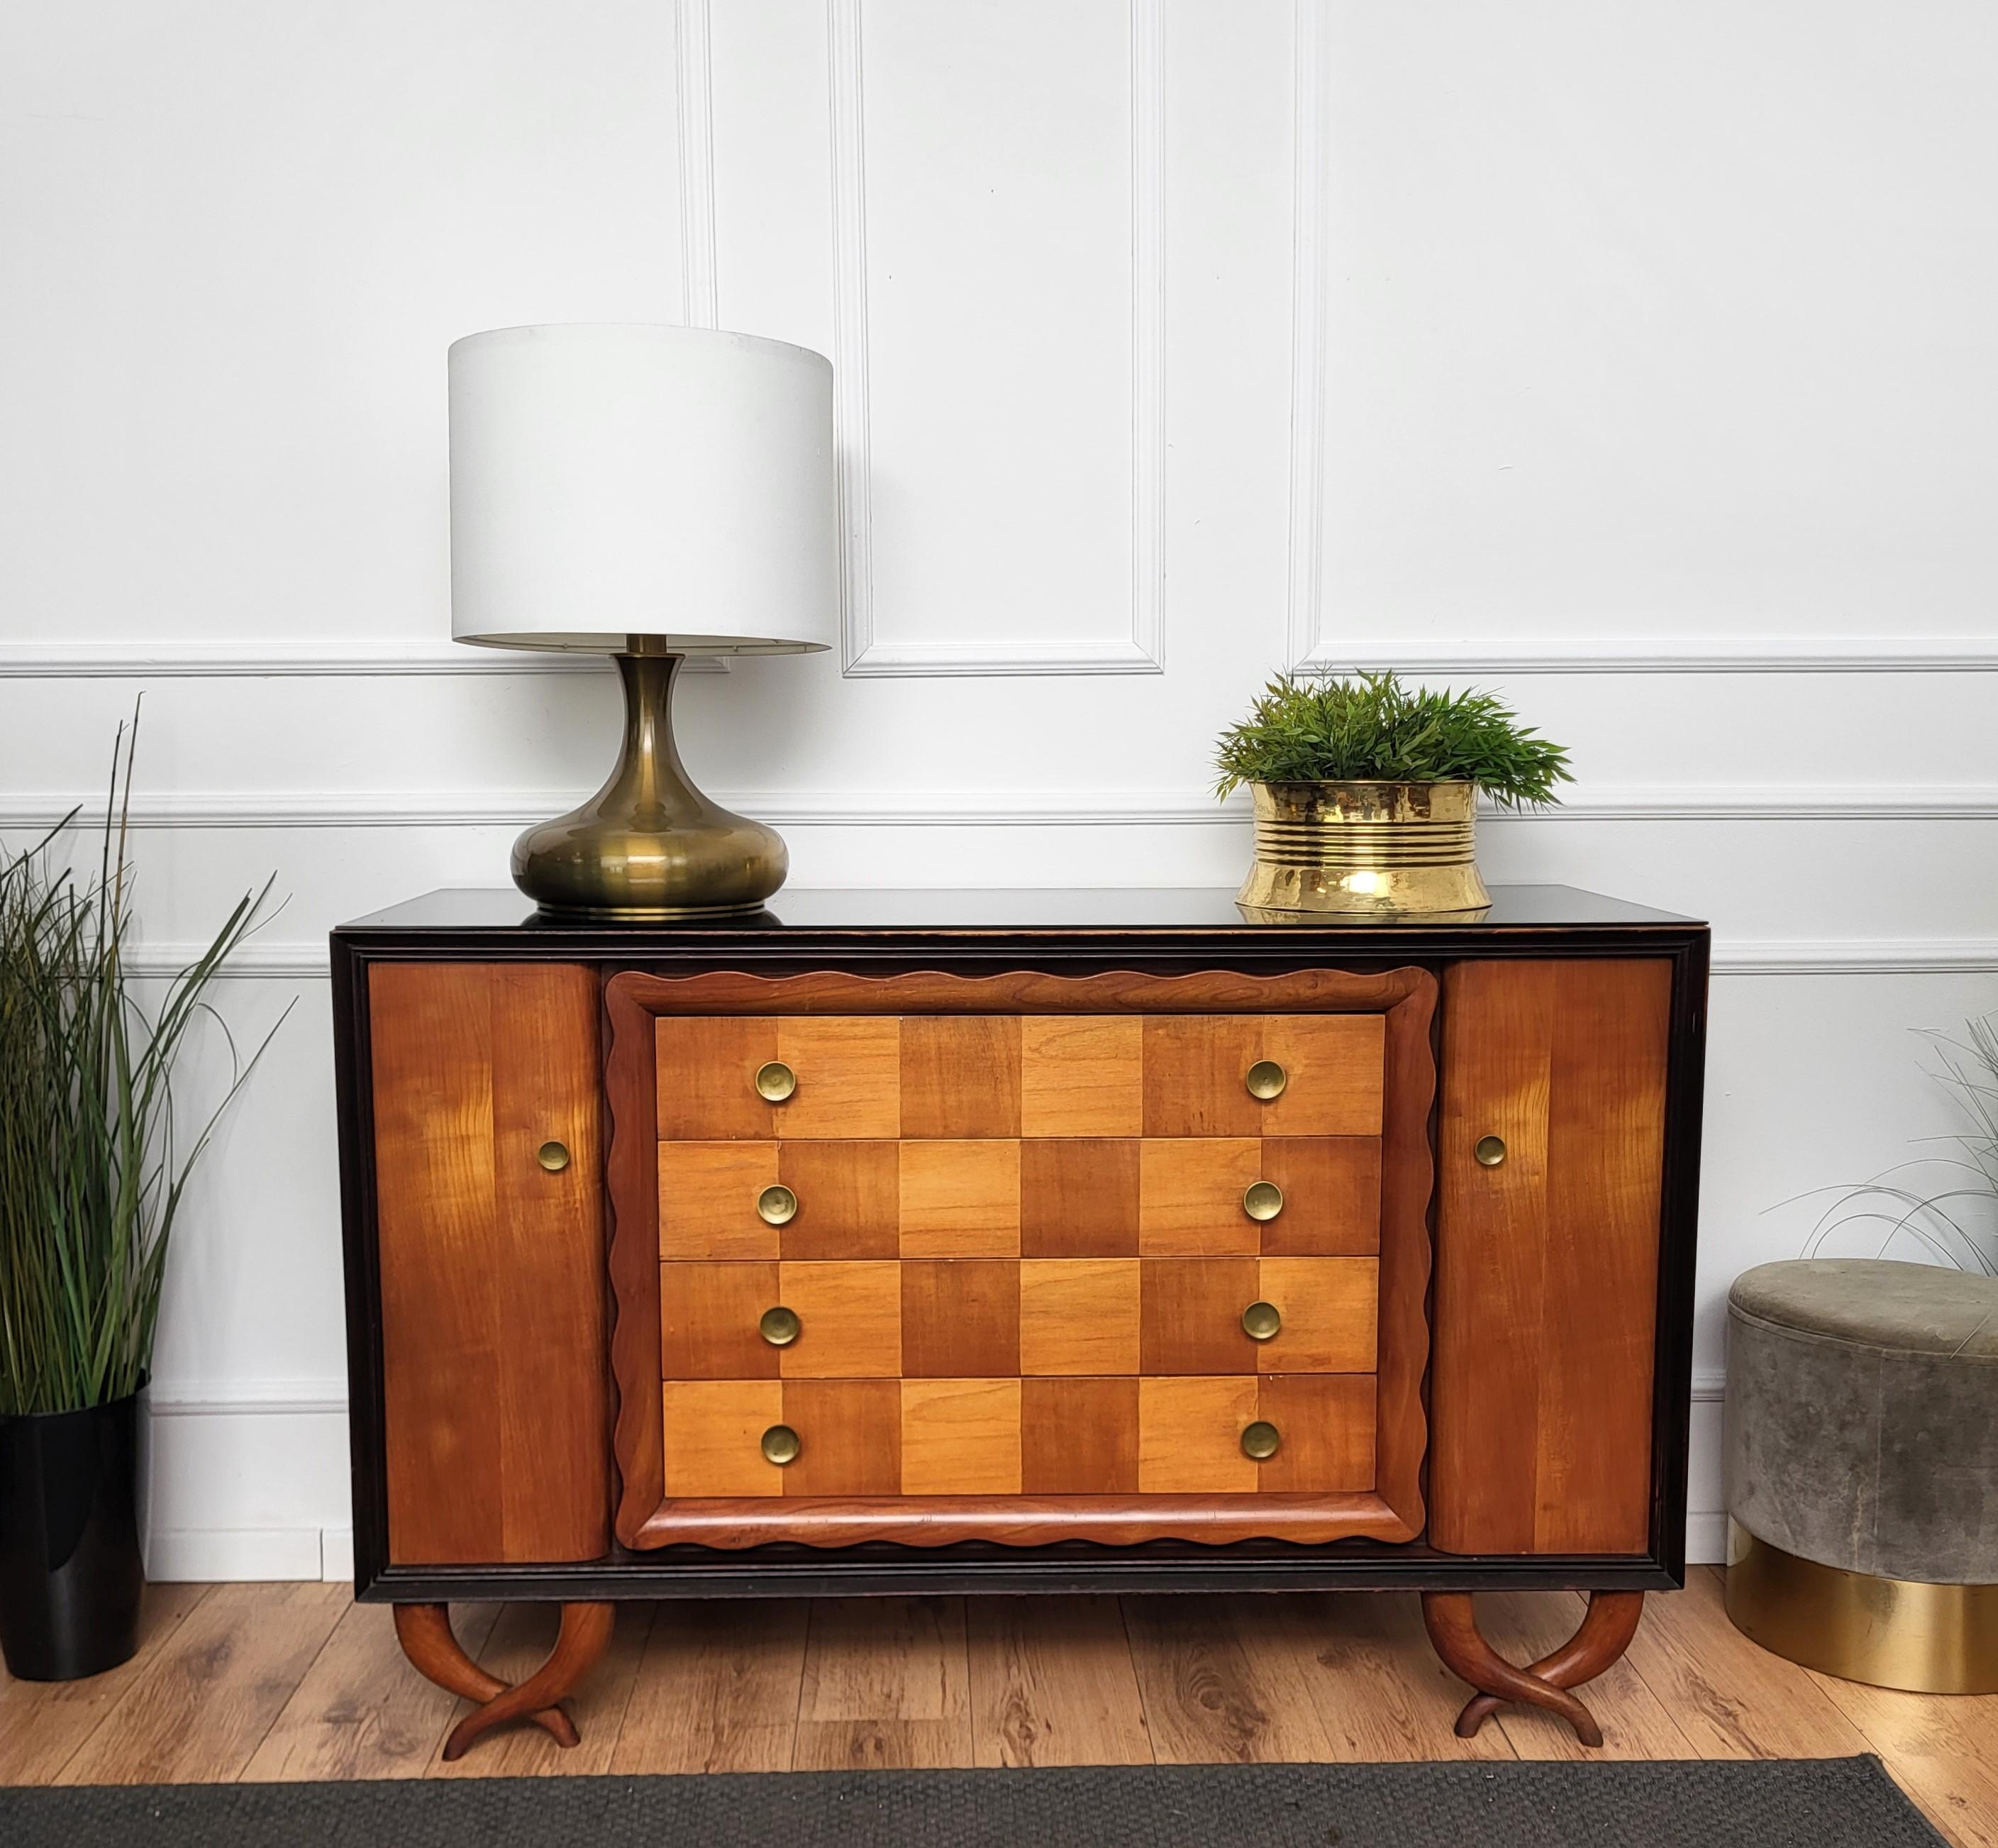 Very elegant Italian Art Deco Mid-Century Modern chest of drawers sideboard credenza, in beautiful veneer walnut briar burl wood, four central drawers and two side doors with shelves completed by great carved feet and frames with brass details and